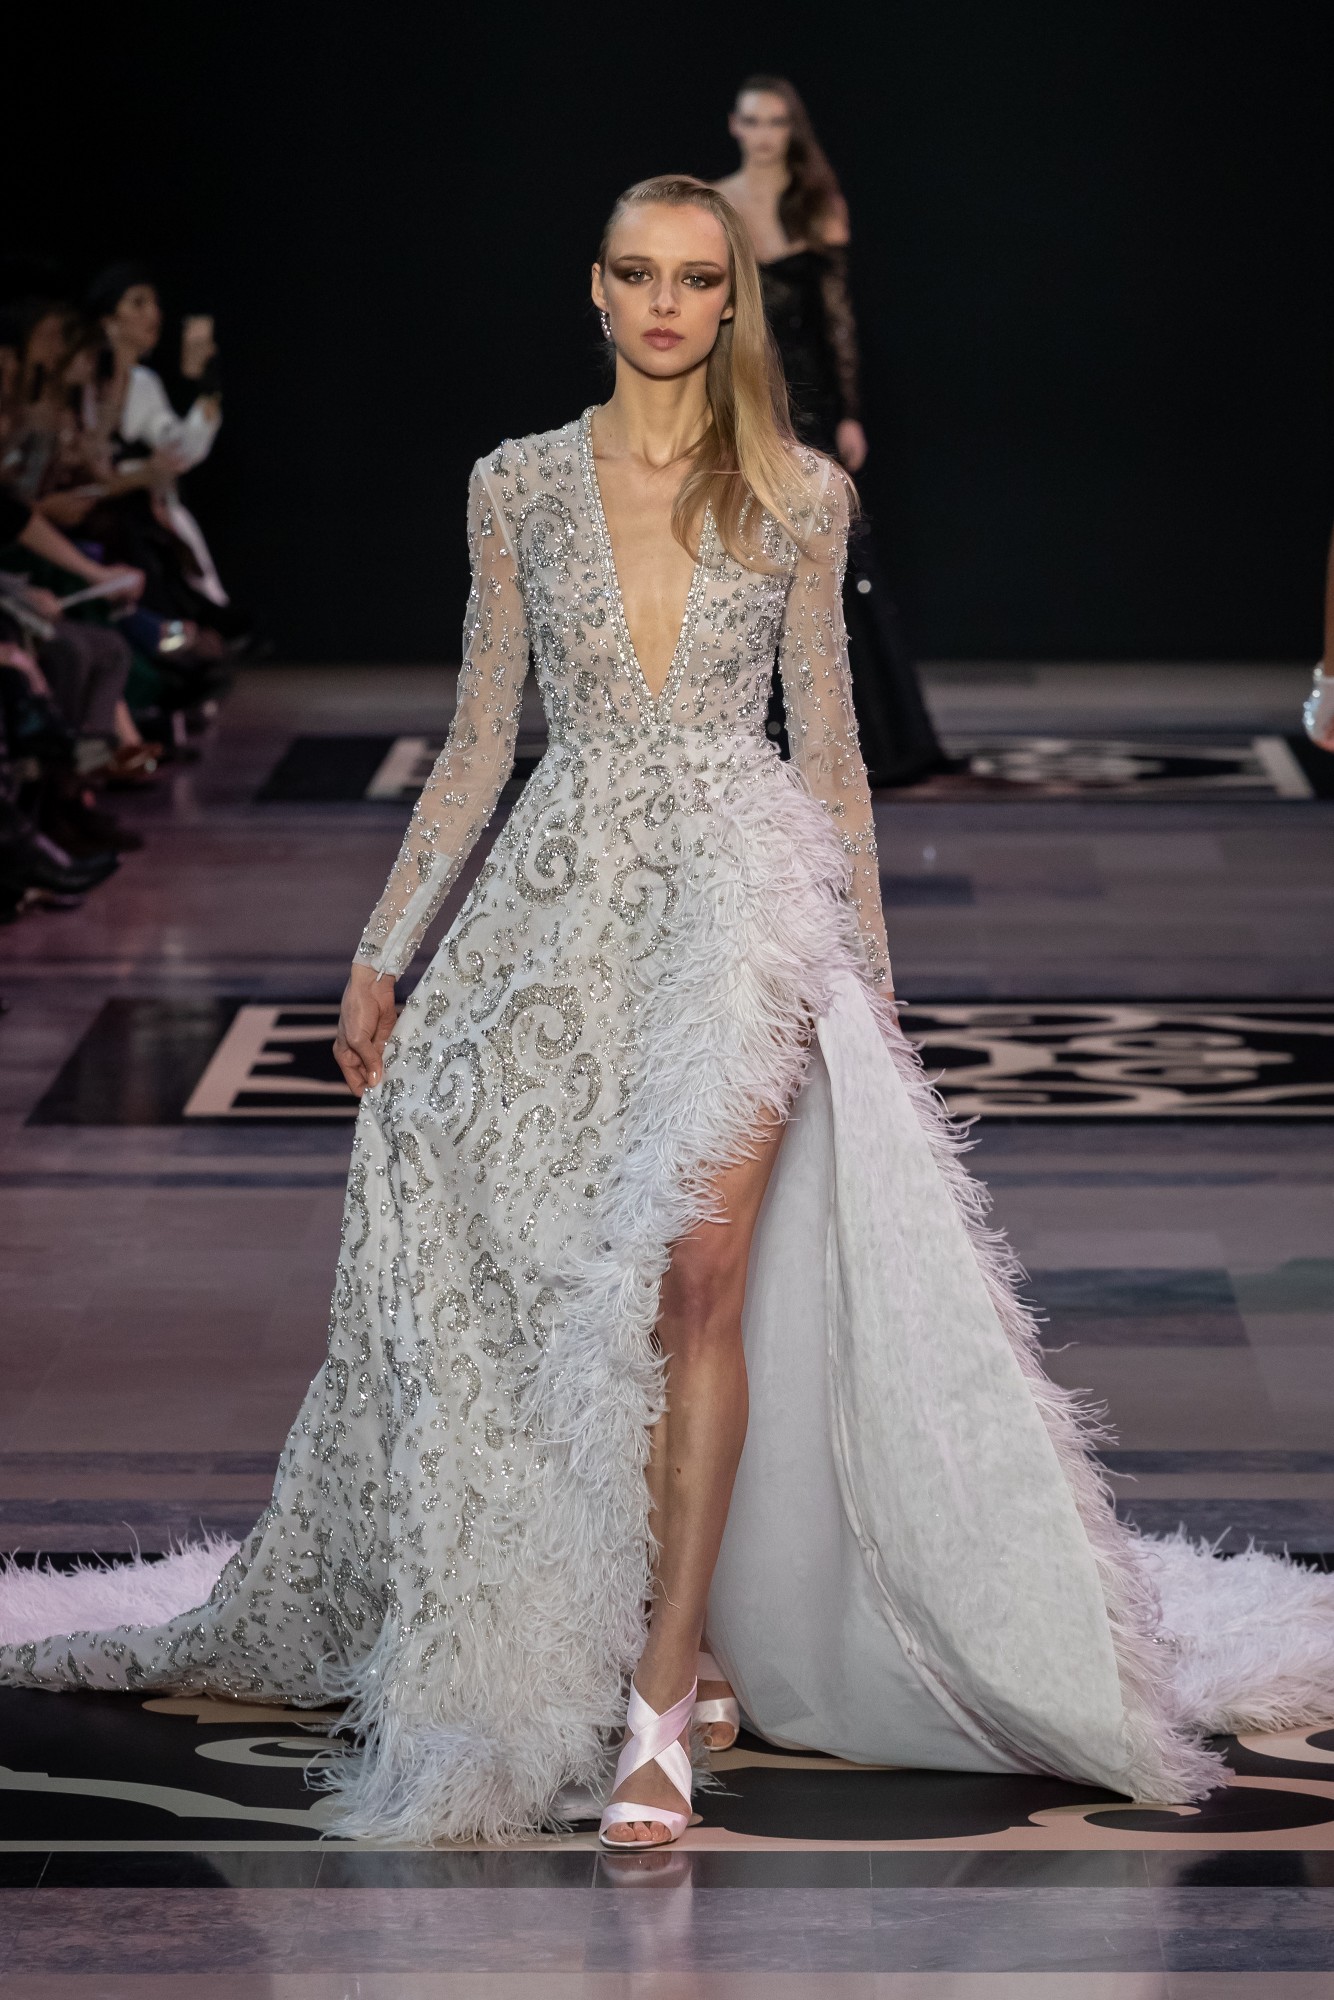 RED CARPET COUTURE GOWNS 2019 | Ditalia